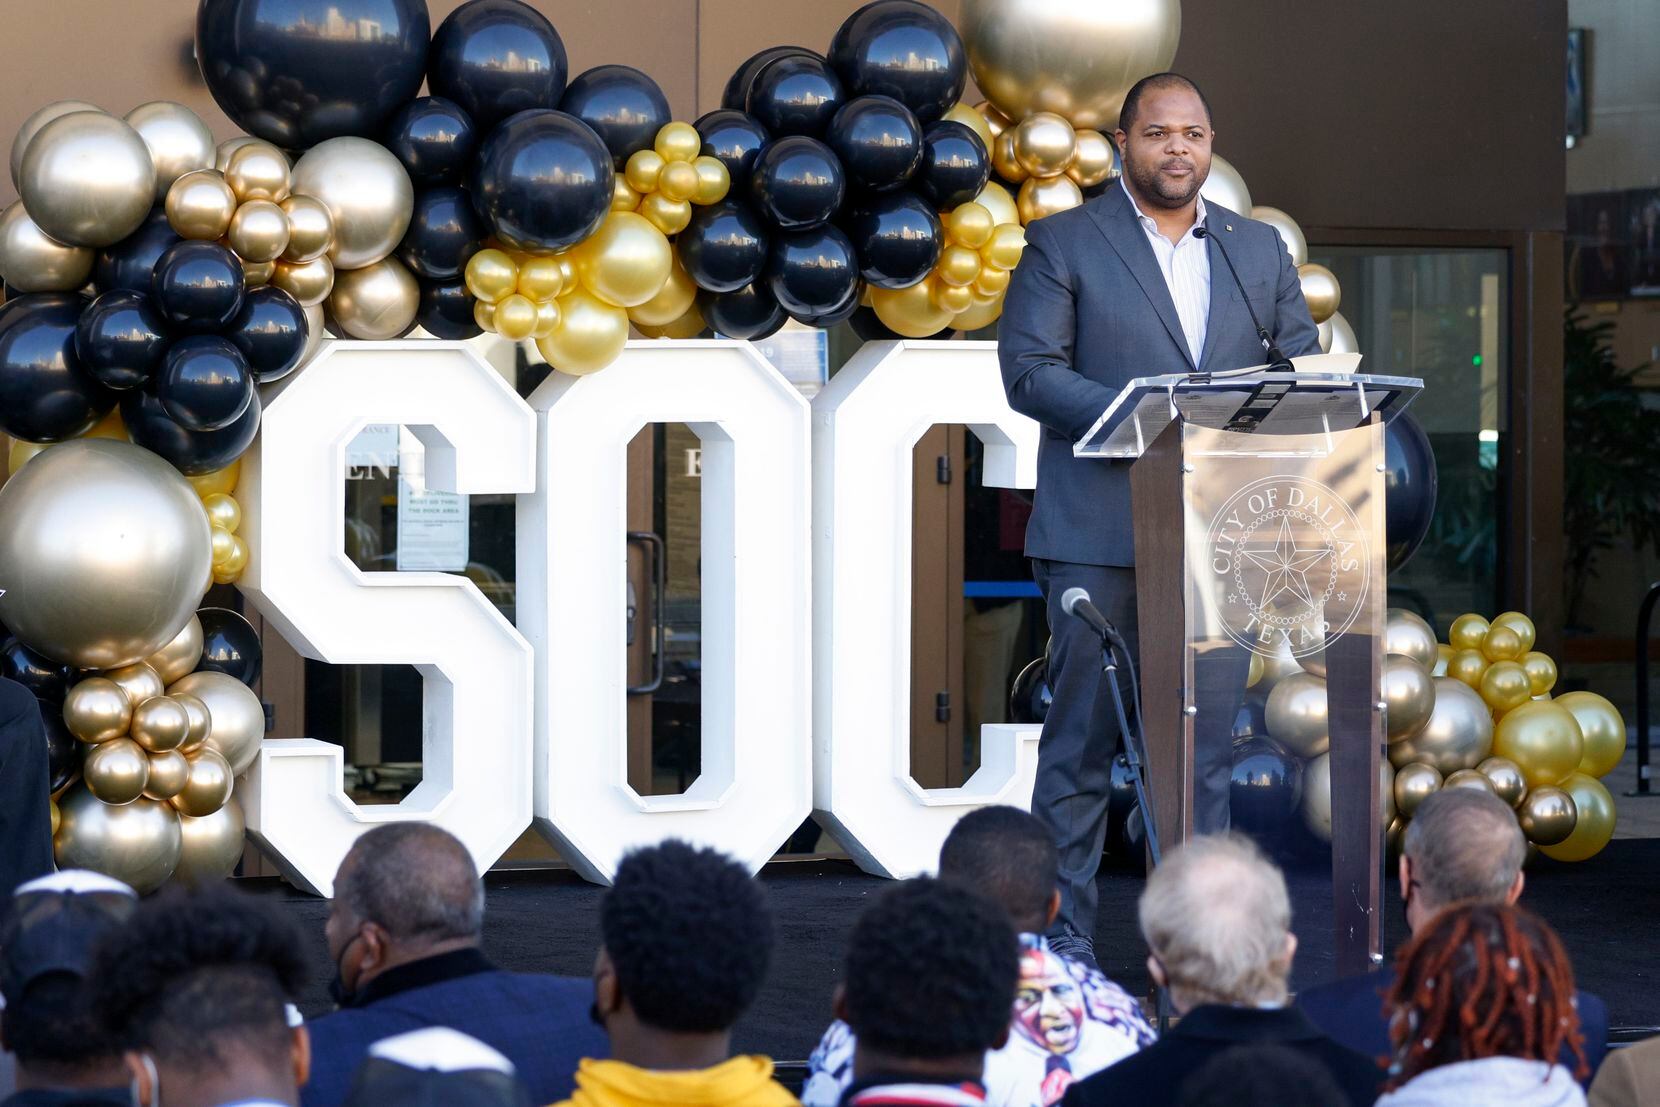 Dallas Mayor Eric Johnson speaks during a ceremony recognizing South Oak Cliff’s UIL Class...